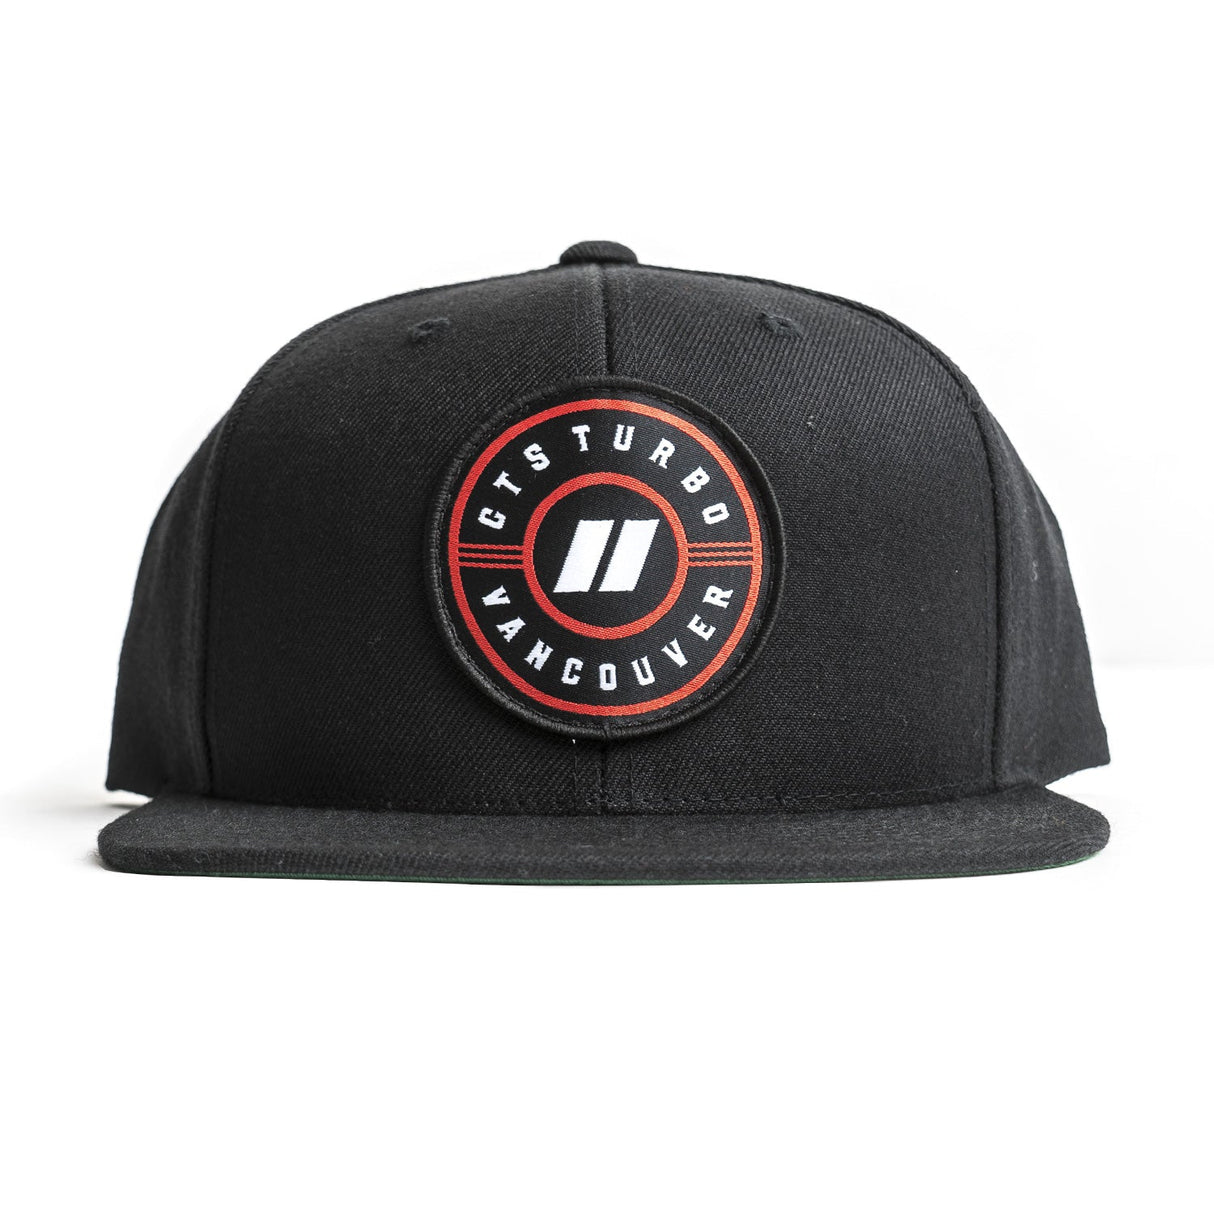 CTS Turbo Vancouver inLimited Editionin Hat